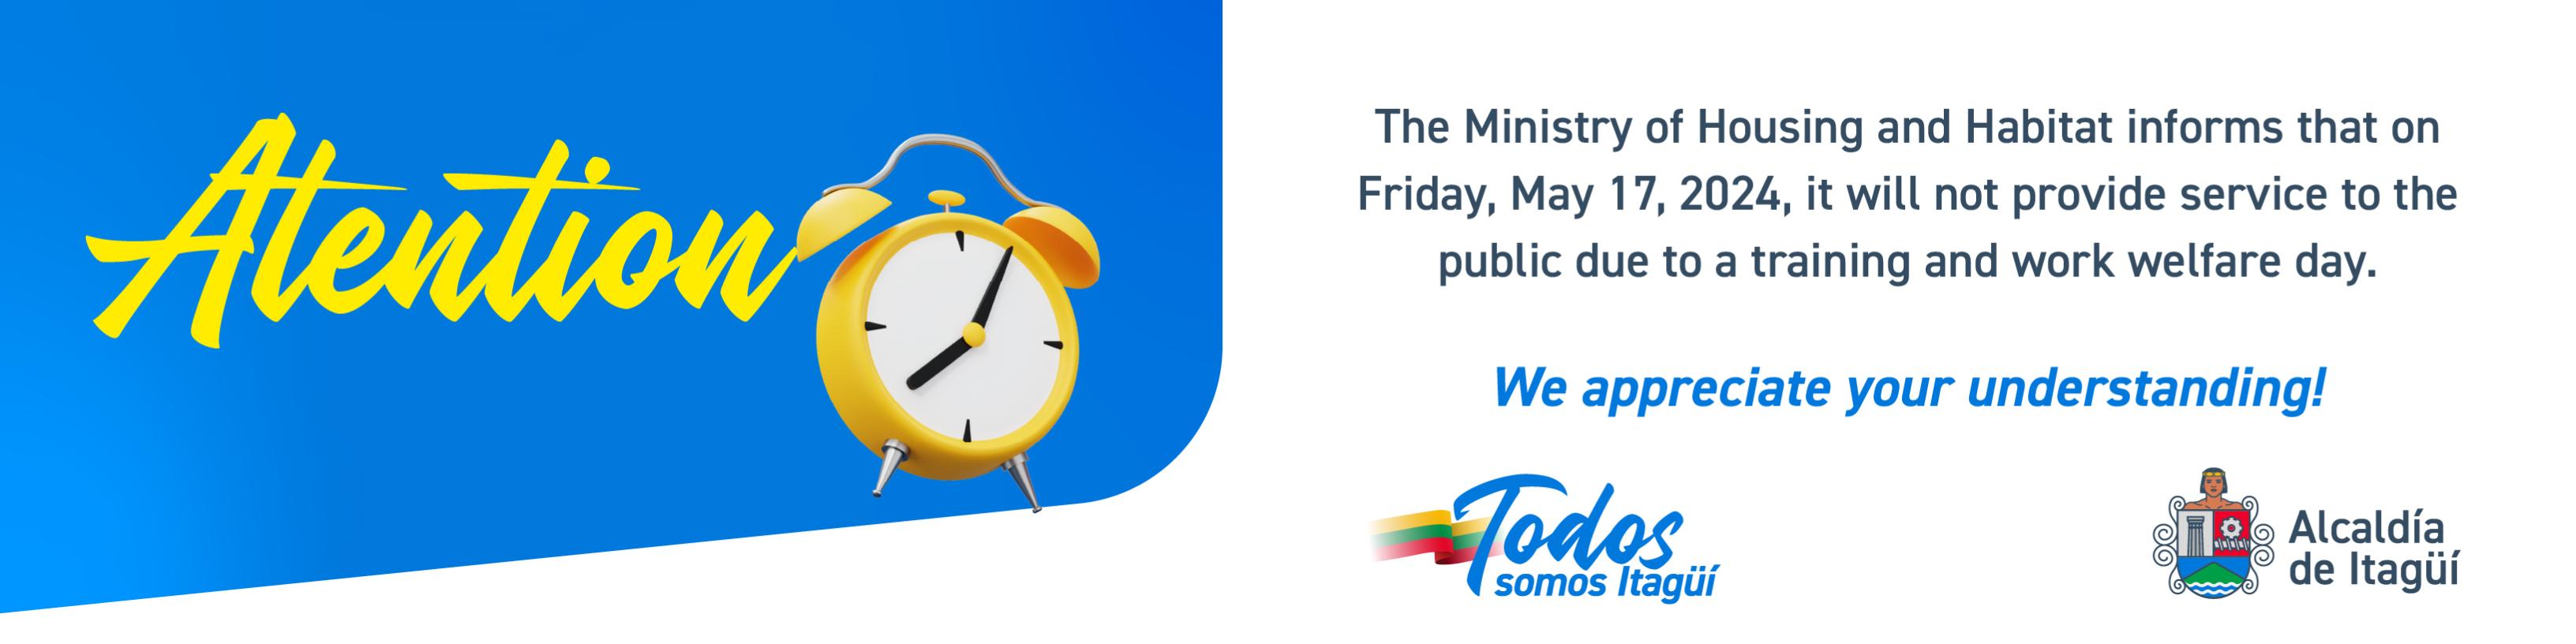 The Ministry of Housing and Habitat informs that on Friday, May 17, 2024, it will not provide service to the public due to a training and work well-being day.